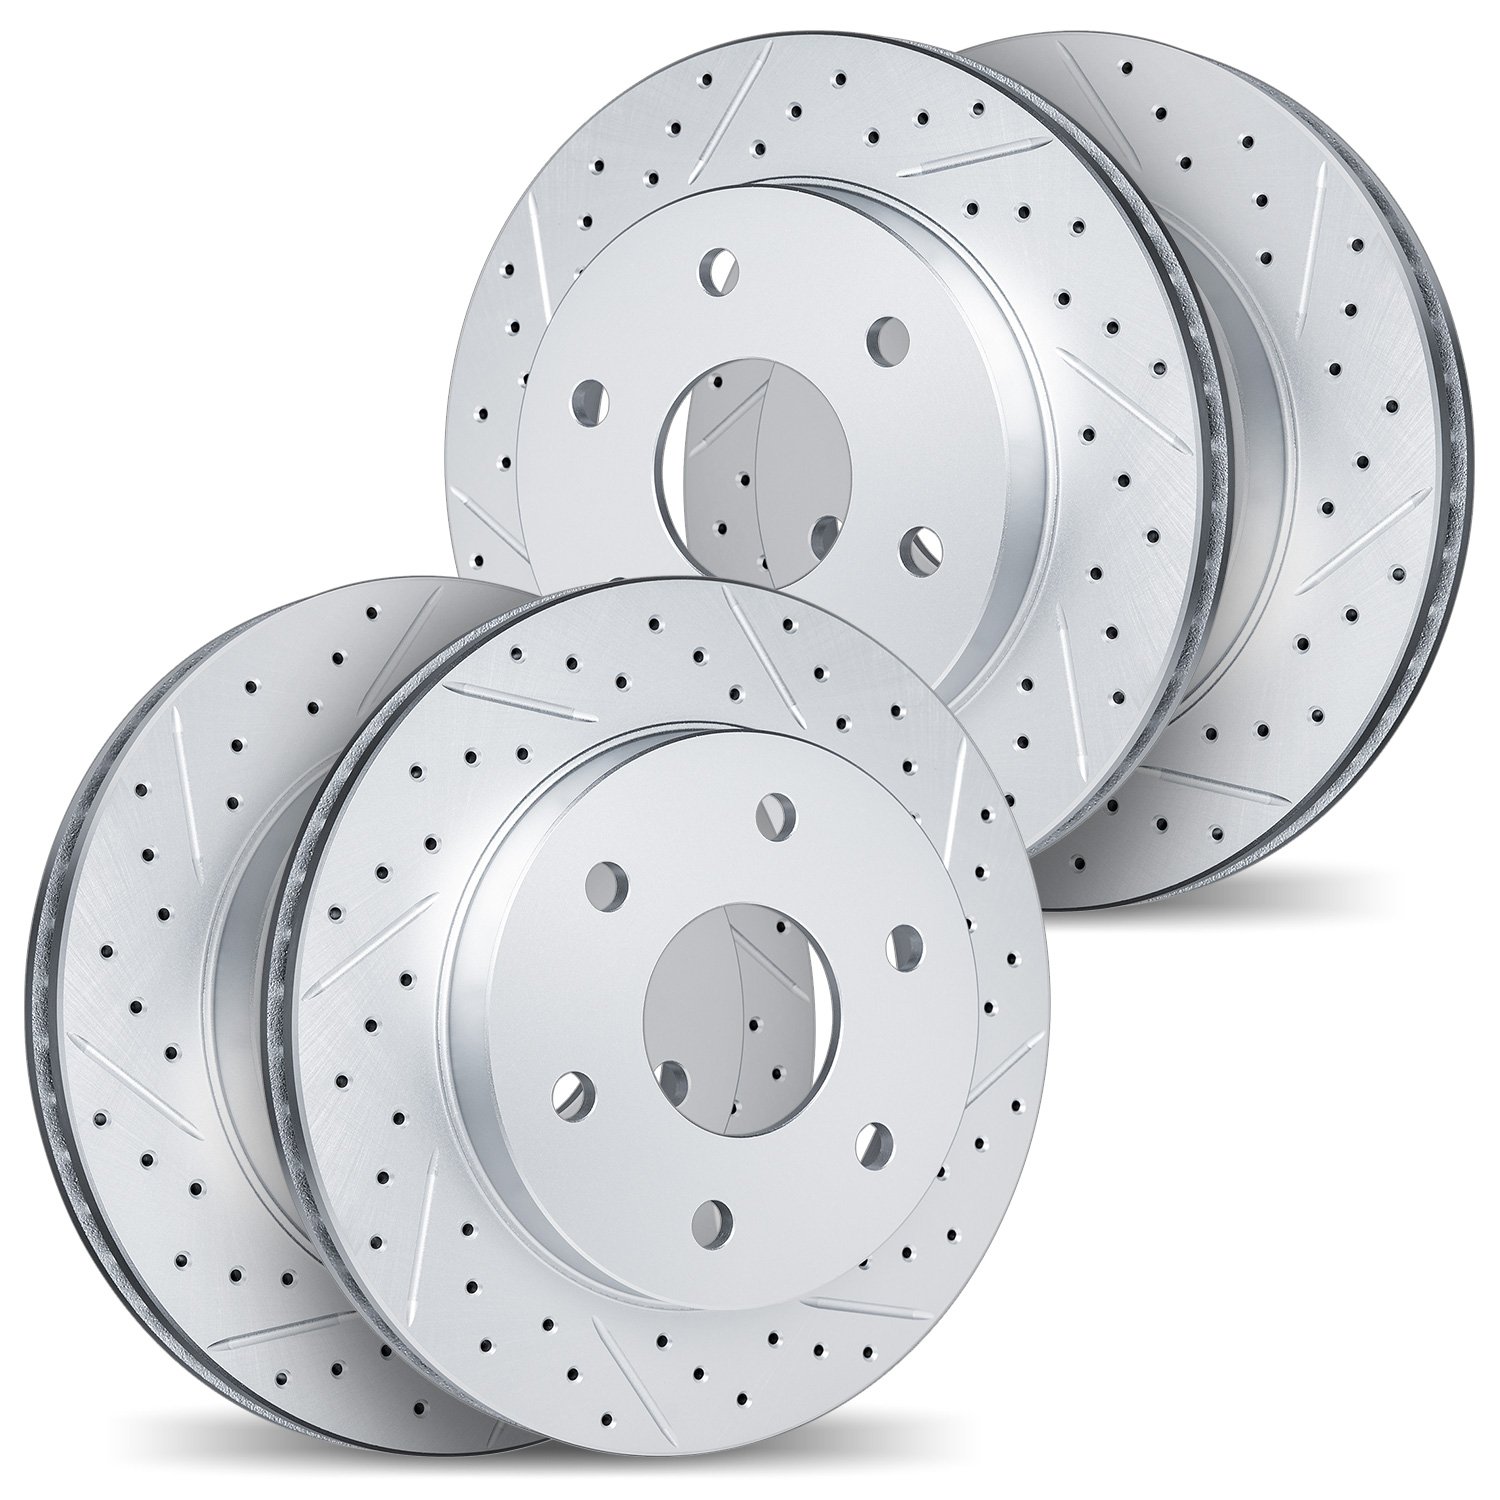 2004-76046 Geoperformance Drilled/Slotted Brake Rotors, 2010-2014 Lexus/Toyota/Scion, Position: Front and Rear